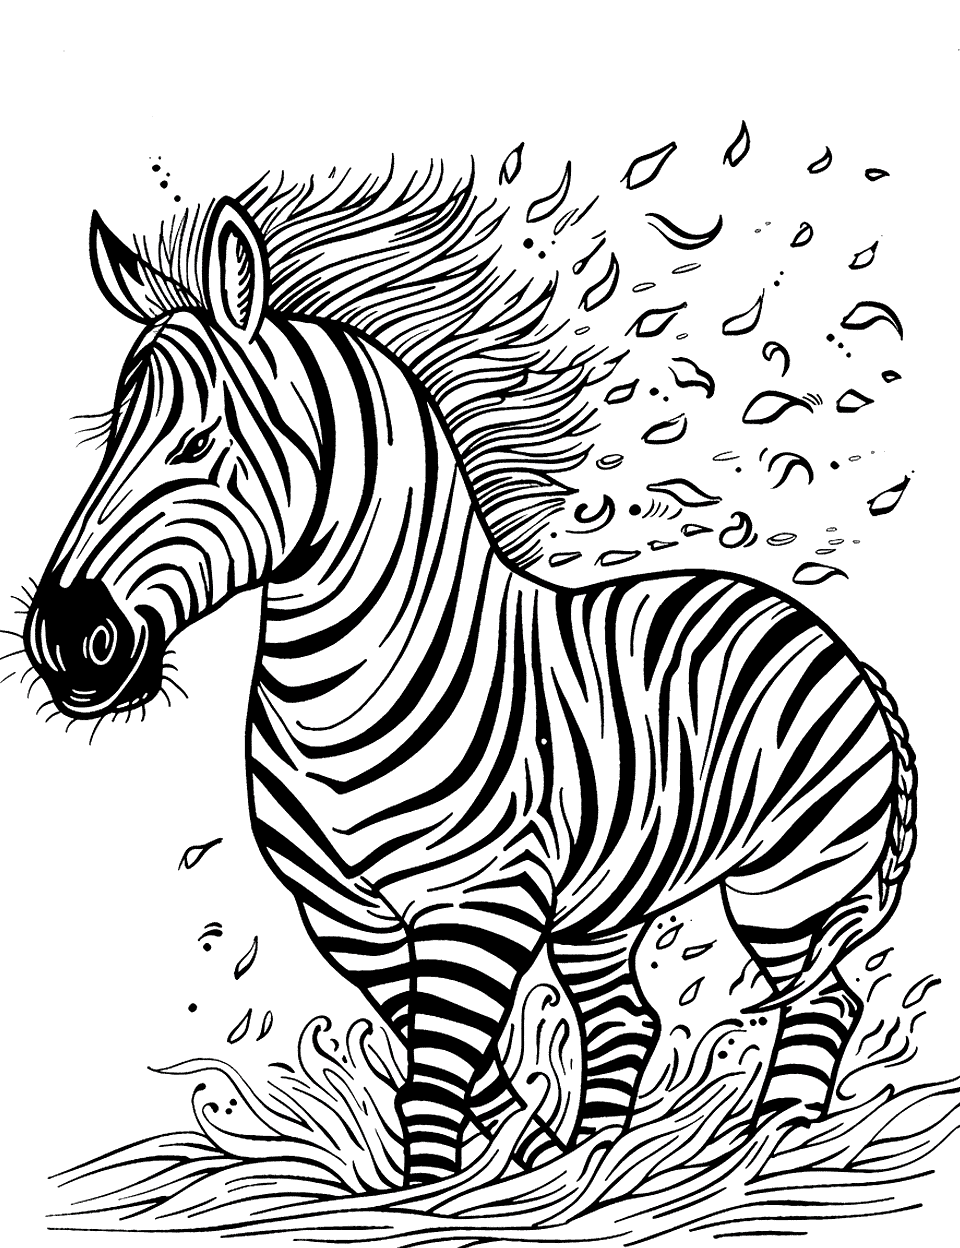 Zebra in a Dusty Wind Coloring Page - A zebra bracing against a gust of wind, dust swirling around it.